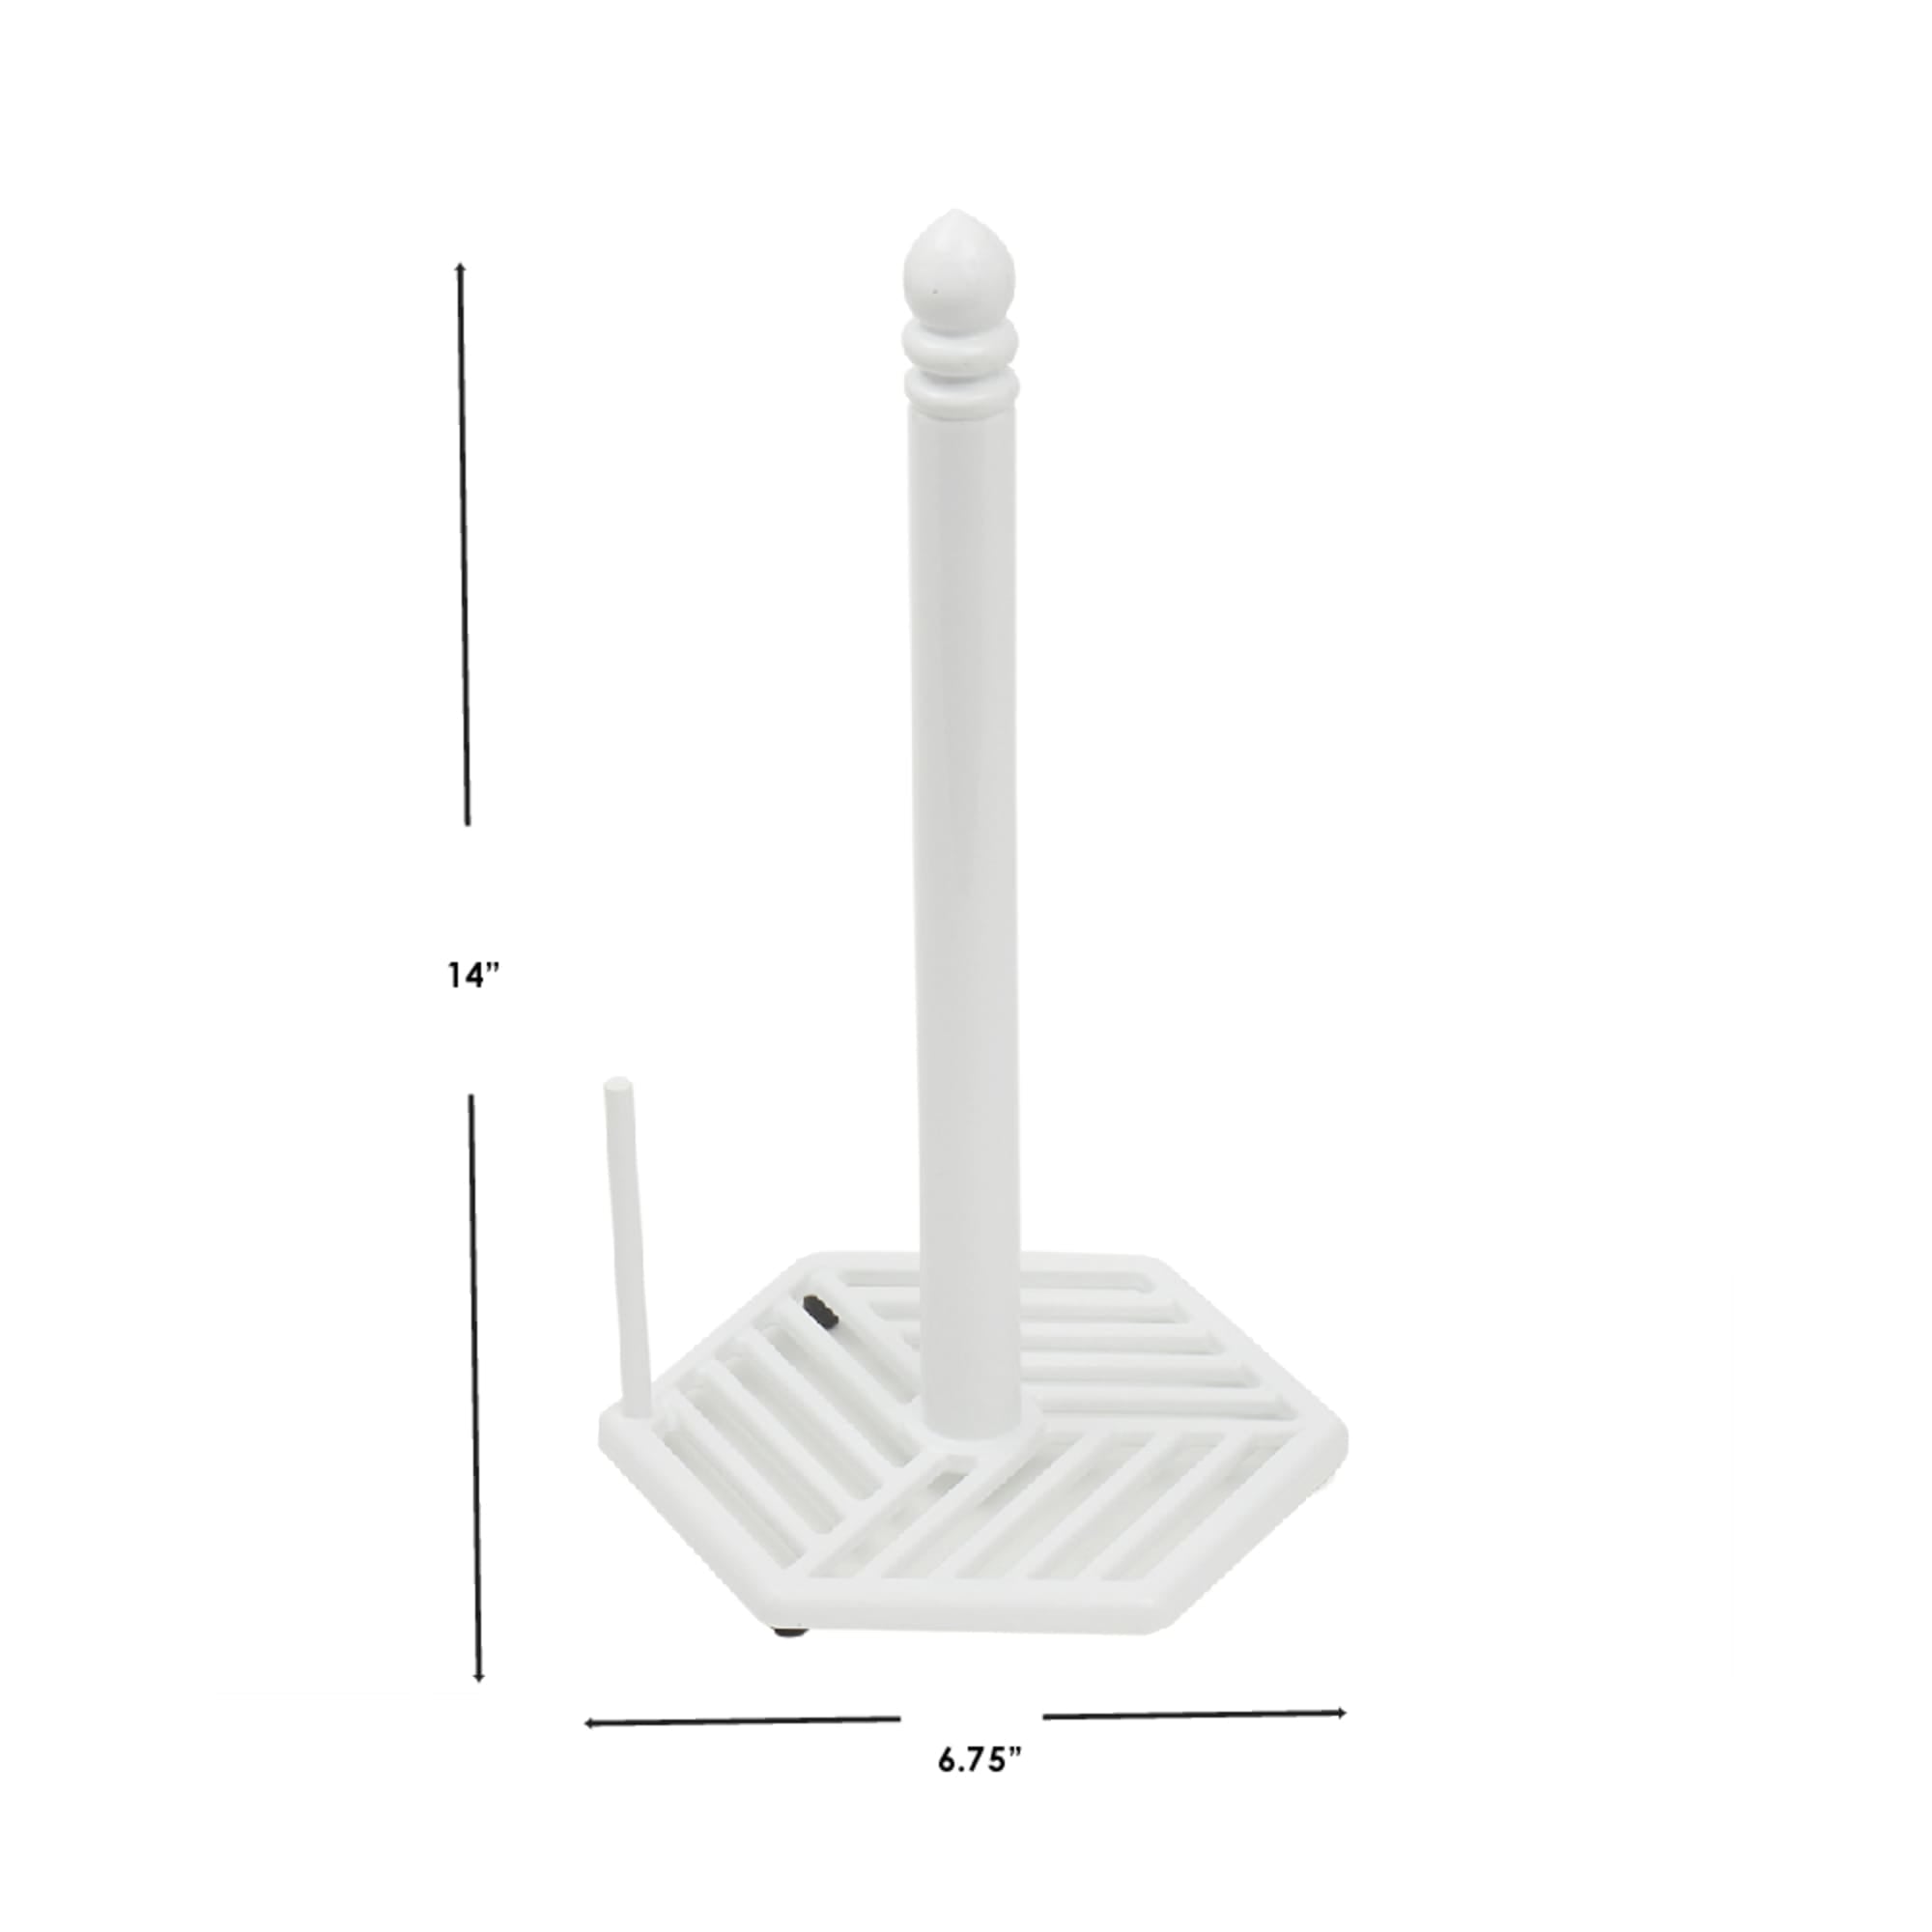 Home Basics Lines Freestanding Cast Iron Paper Towel Holder with Dispensing Side Bar, White $8.00 EACH, CASE PACK OF 3